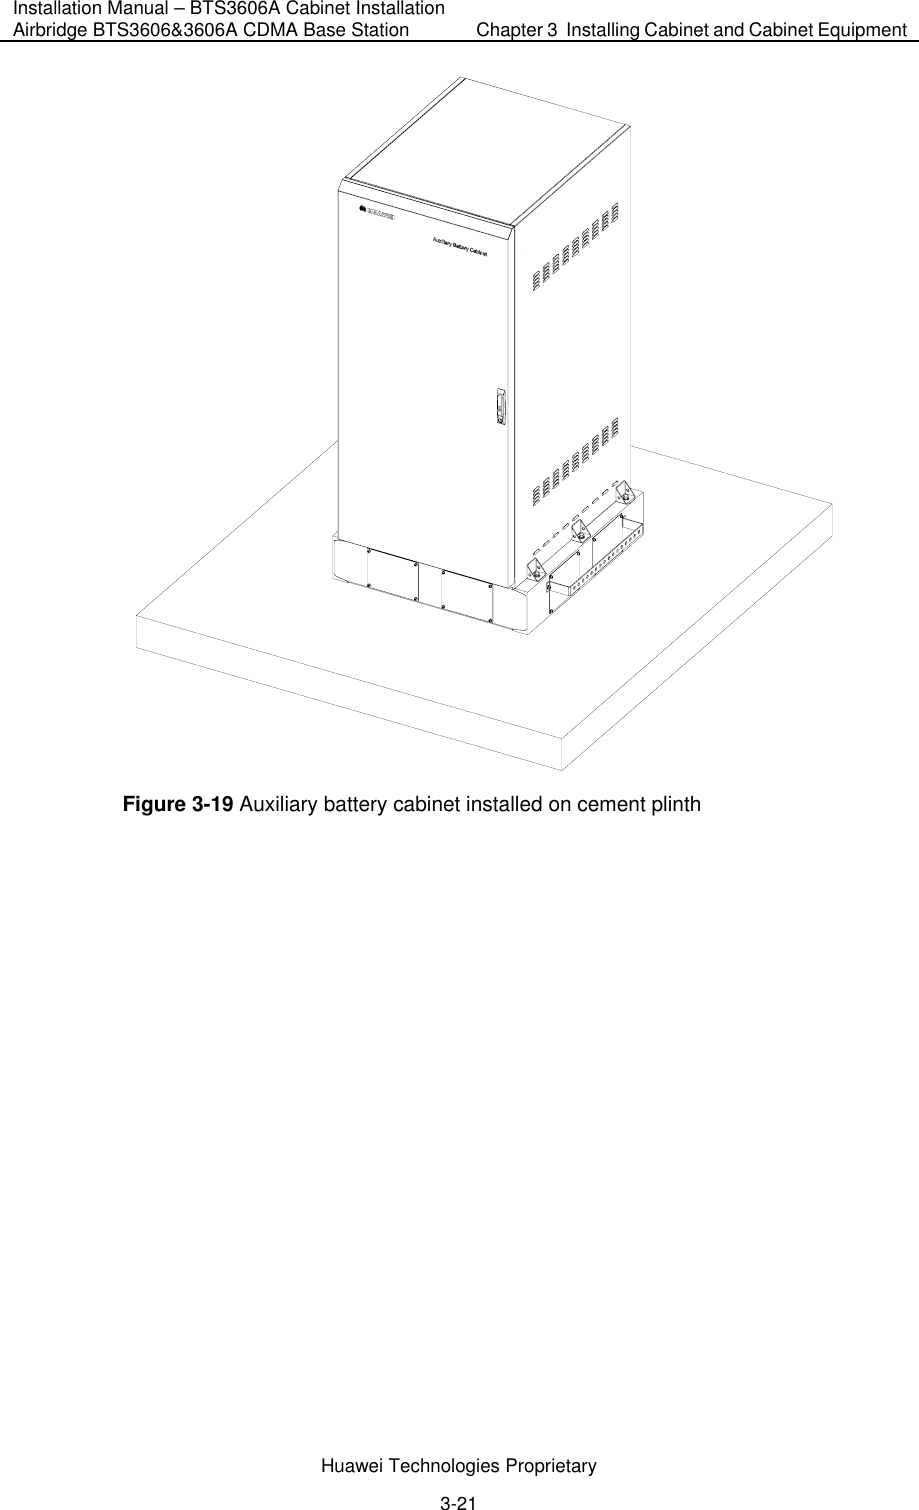 Installation Manual – BTS3606A Cabinet Installation Airbridge BTS3606&amp;3606A CDMA Base Station  Chapter 3  Installing Cabinet and Cabinet Equipment  Huawei Technologies Proprietary 3-21  Figure 3-19 Auxiliary battery cabinet installed on cement plinth 